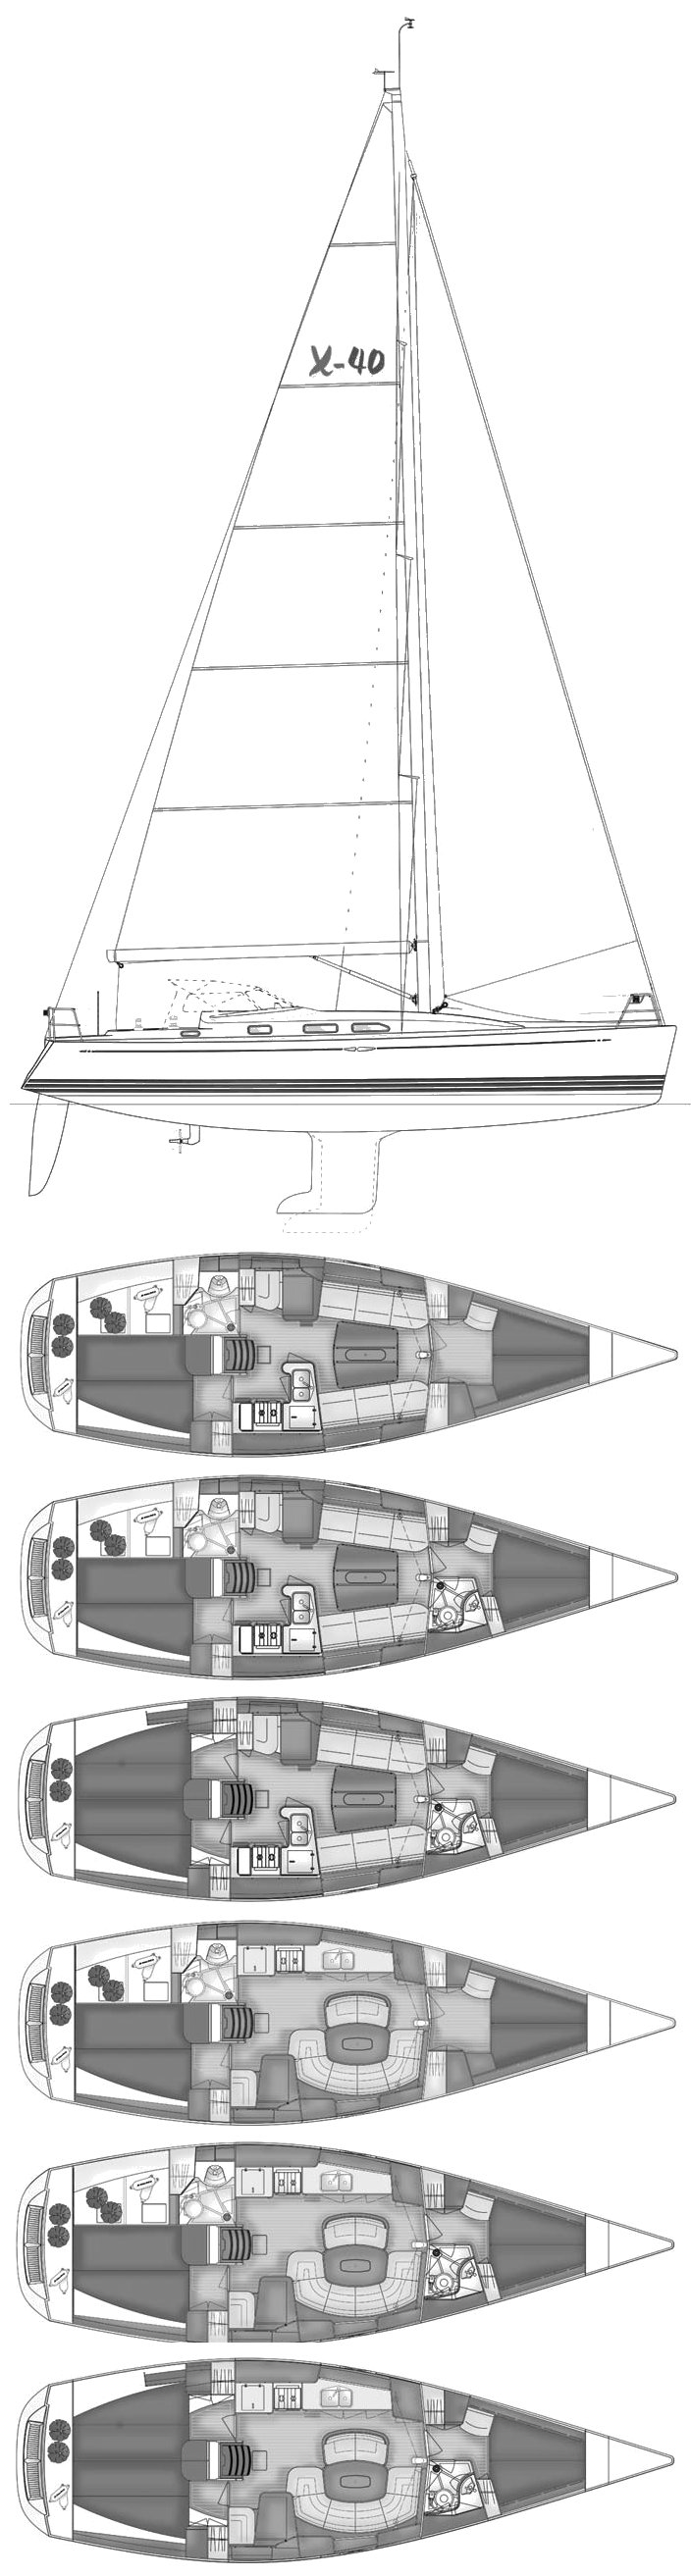 Drawing of X-40